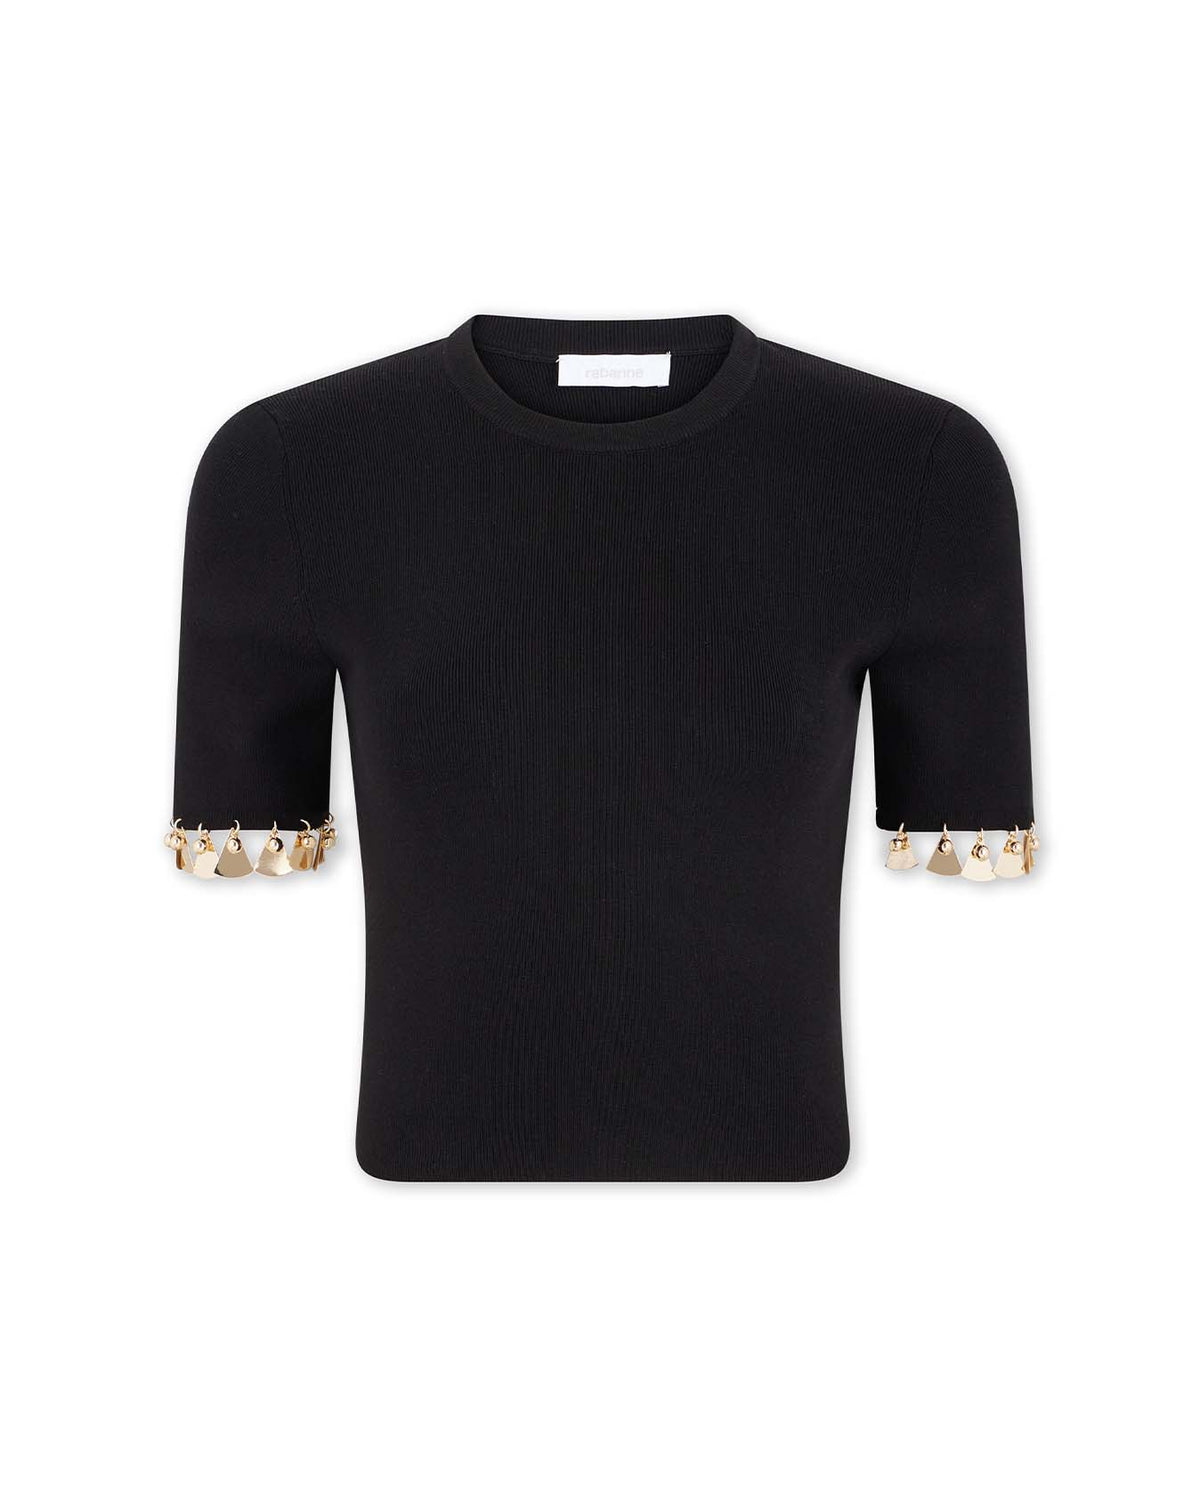 Black Top With Gold Stud Sleeve